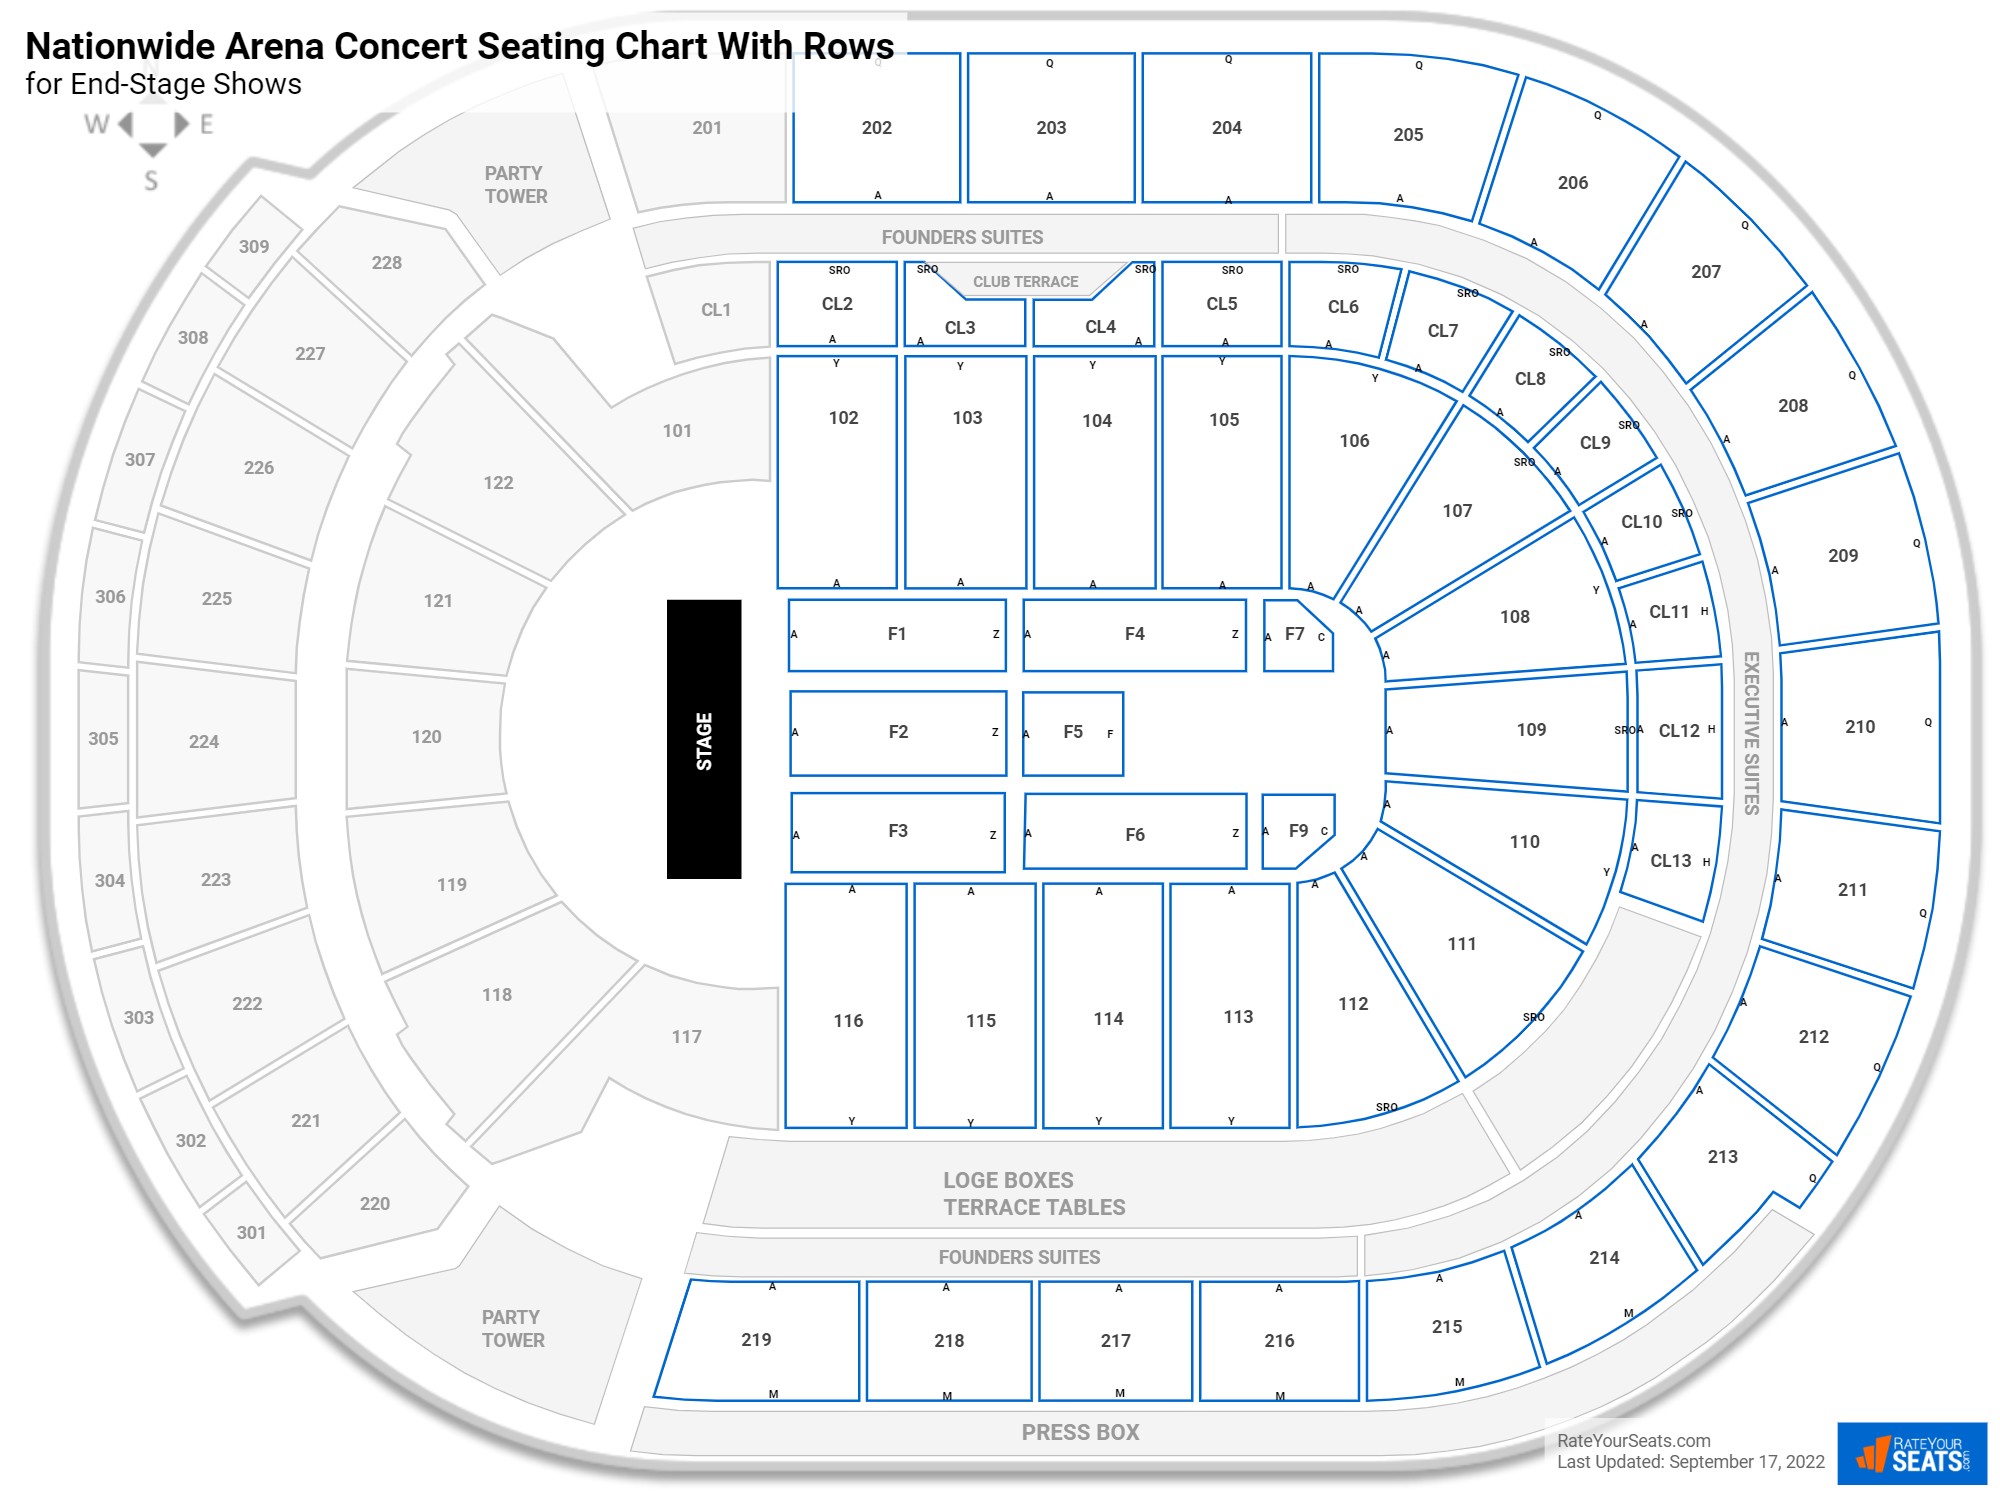 Nationwide Arena seating chart with rows concert